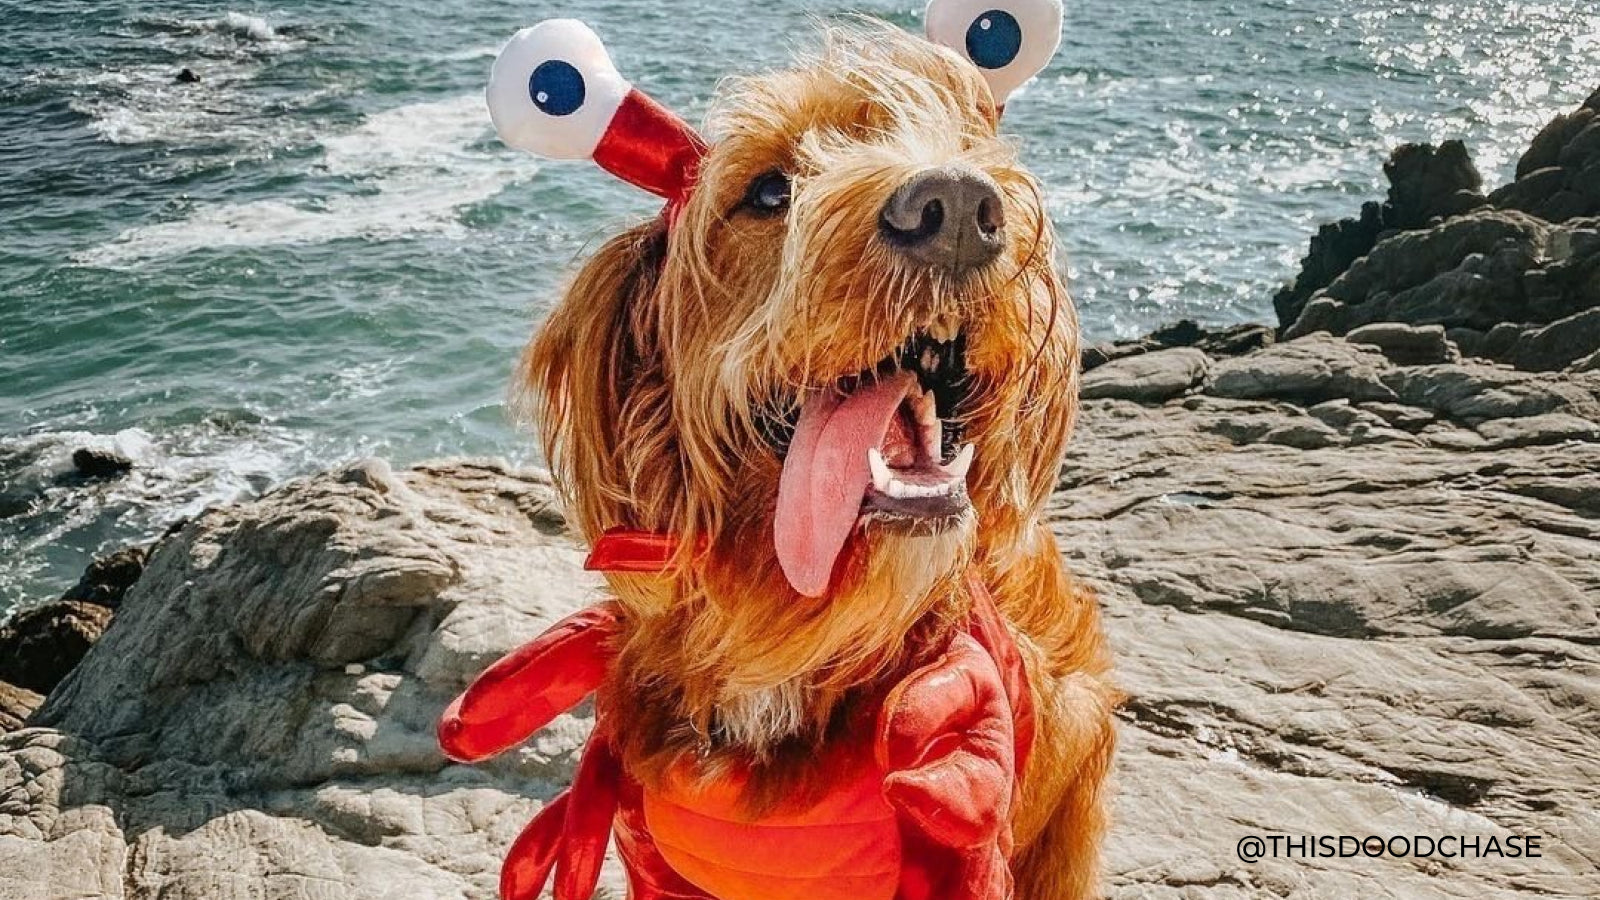 A tan dog with long hair sits by the ocean wearing a red crab costume